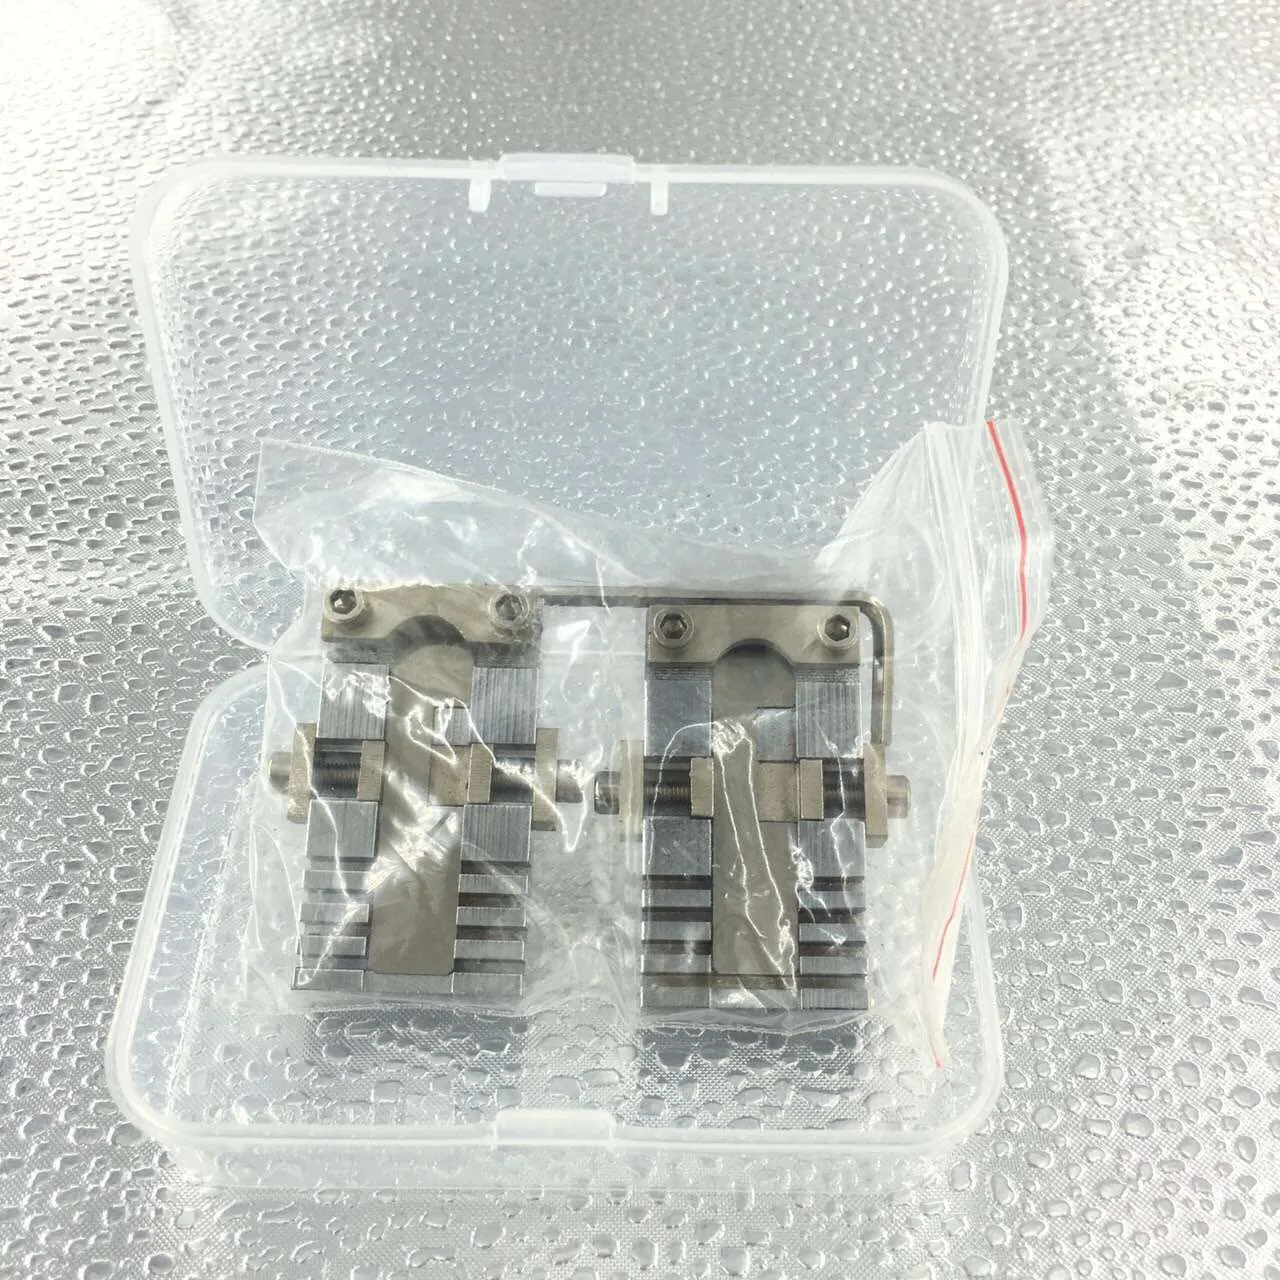 Universal Key Machine Fixture Clamp Parts Locksmith Tools for Key Copy Machine For Special Car Or House Keys